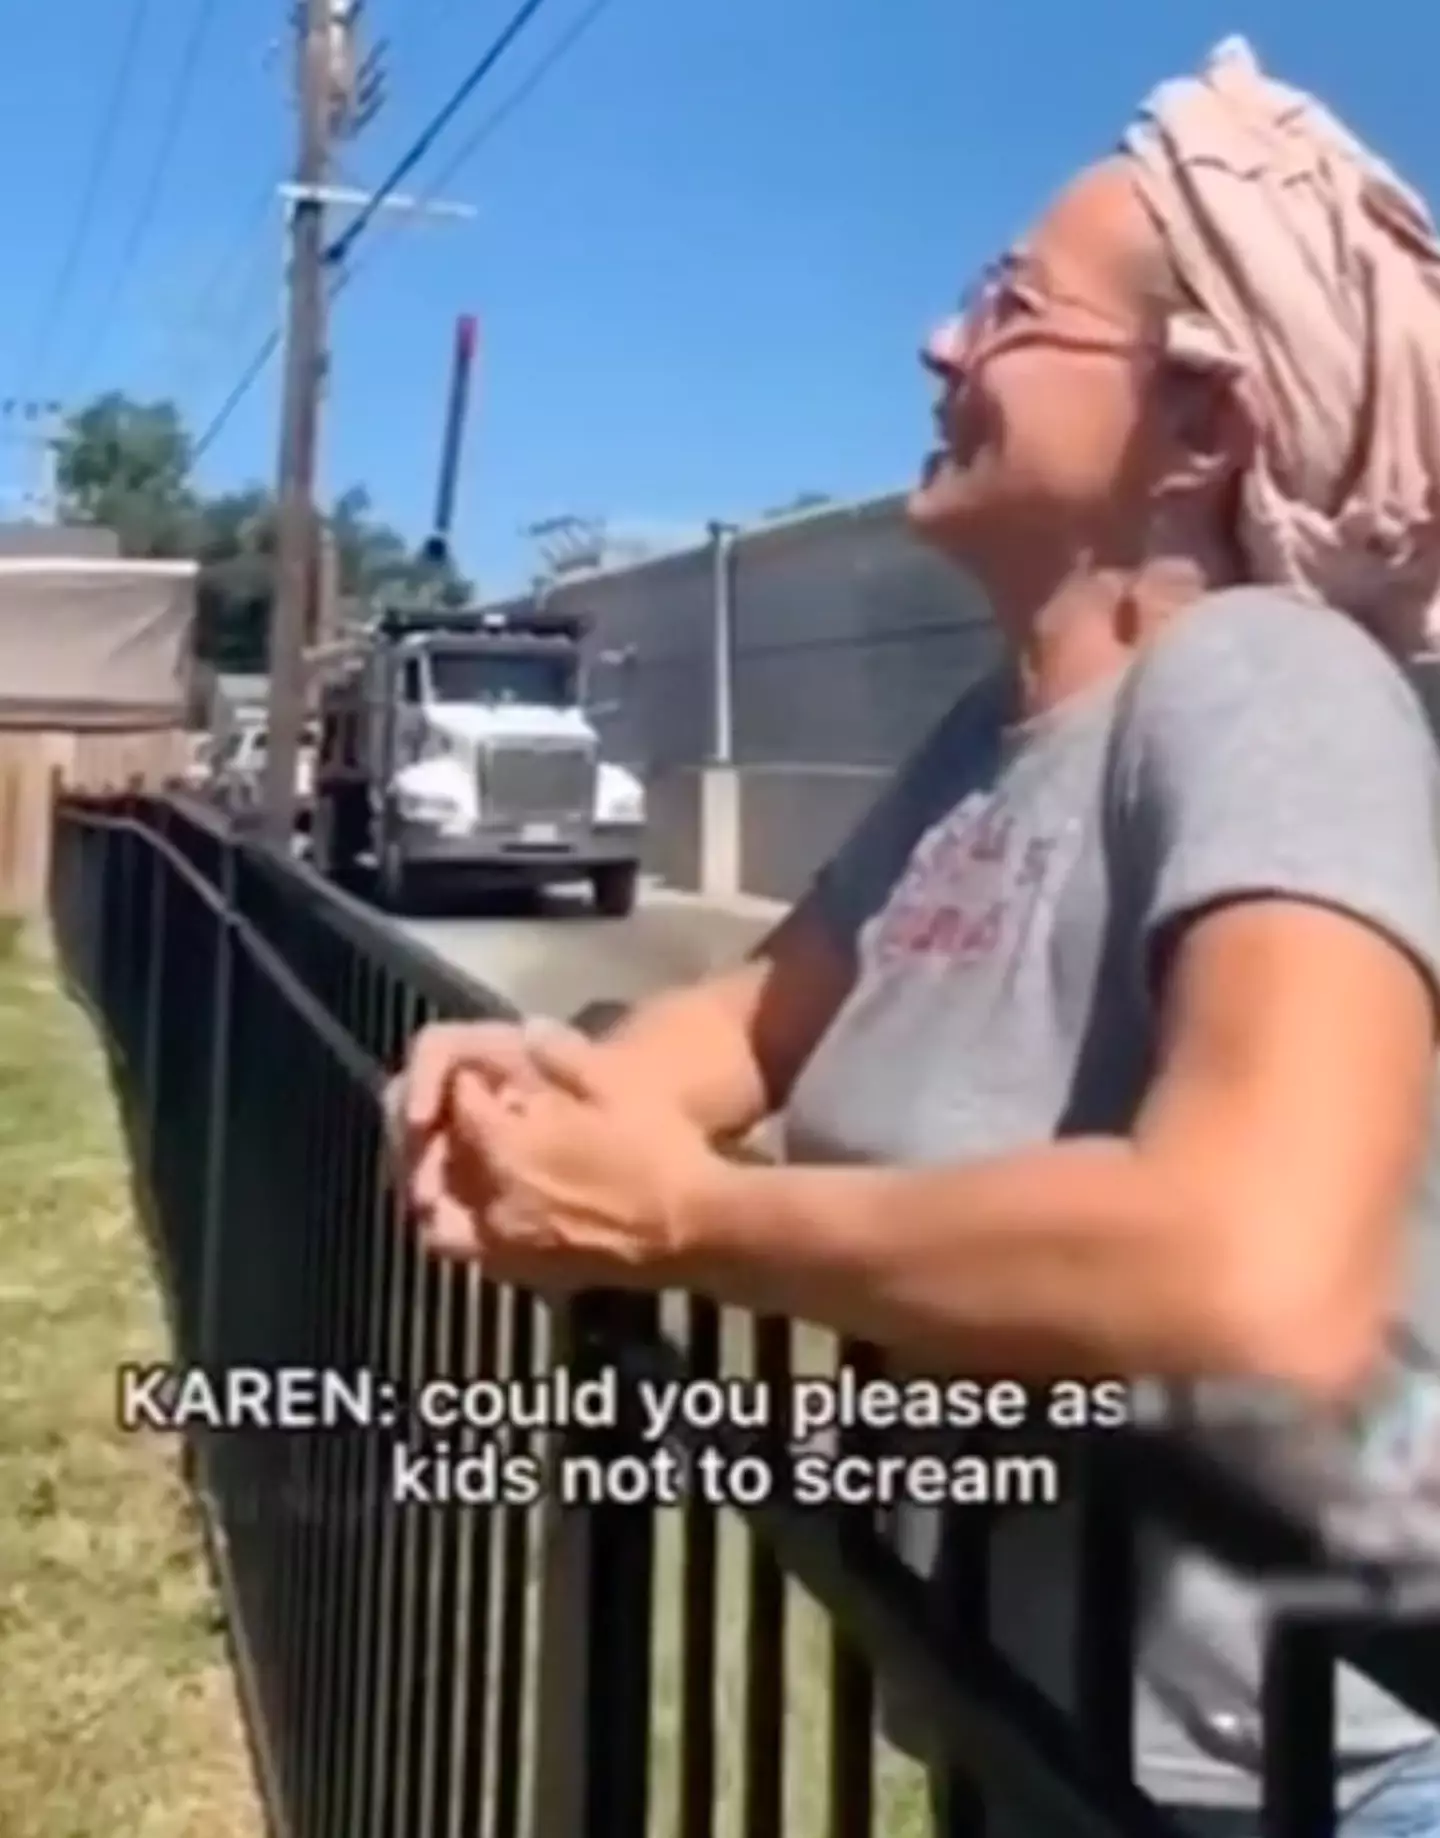 A woman has gone viral after she was captured on video telling a group of school children playing in a local park to be quiet.